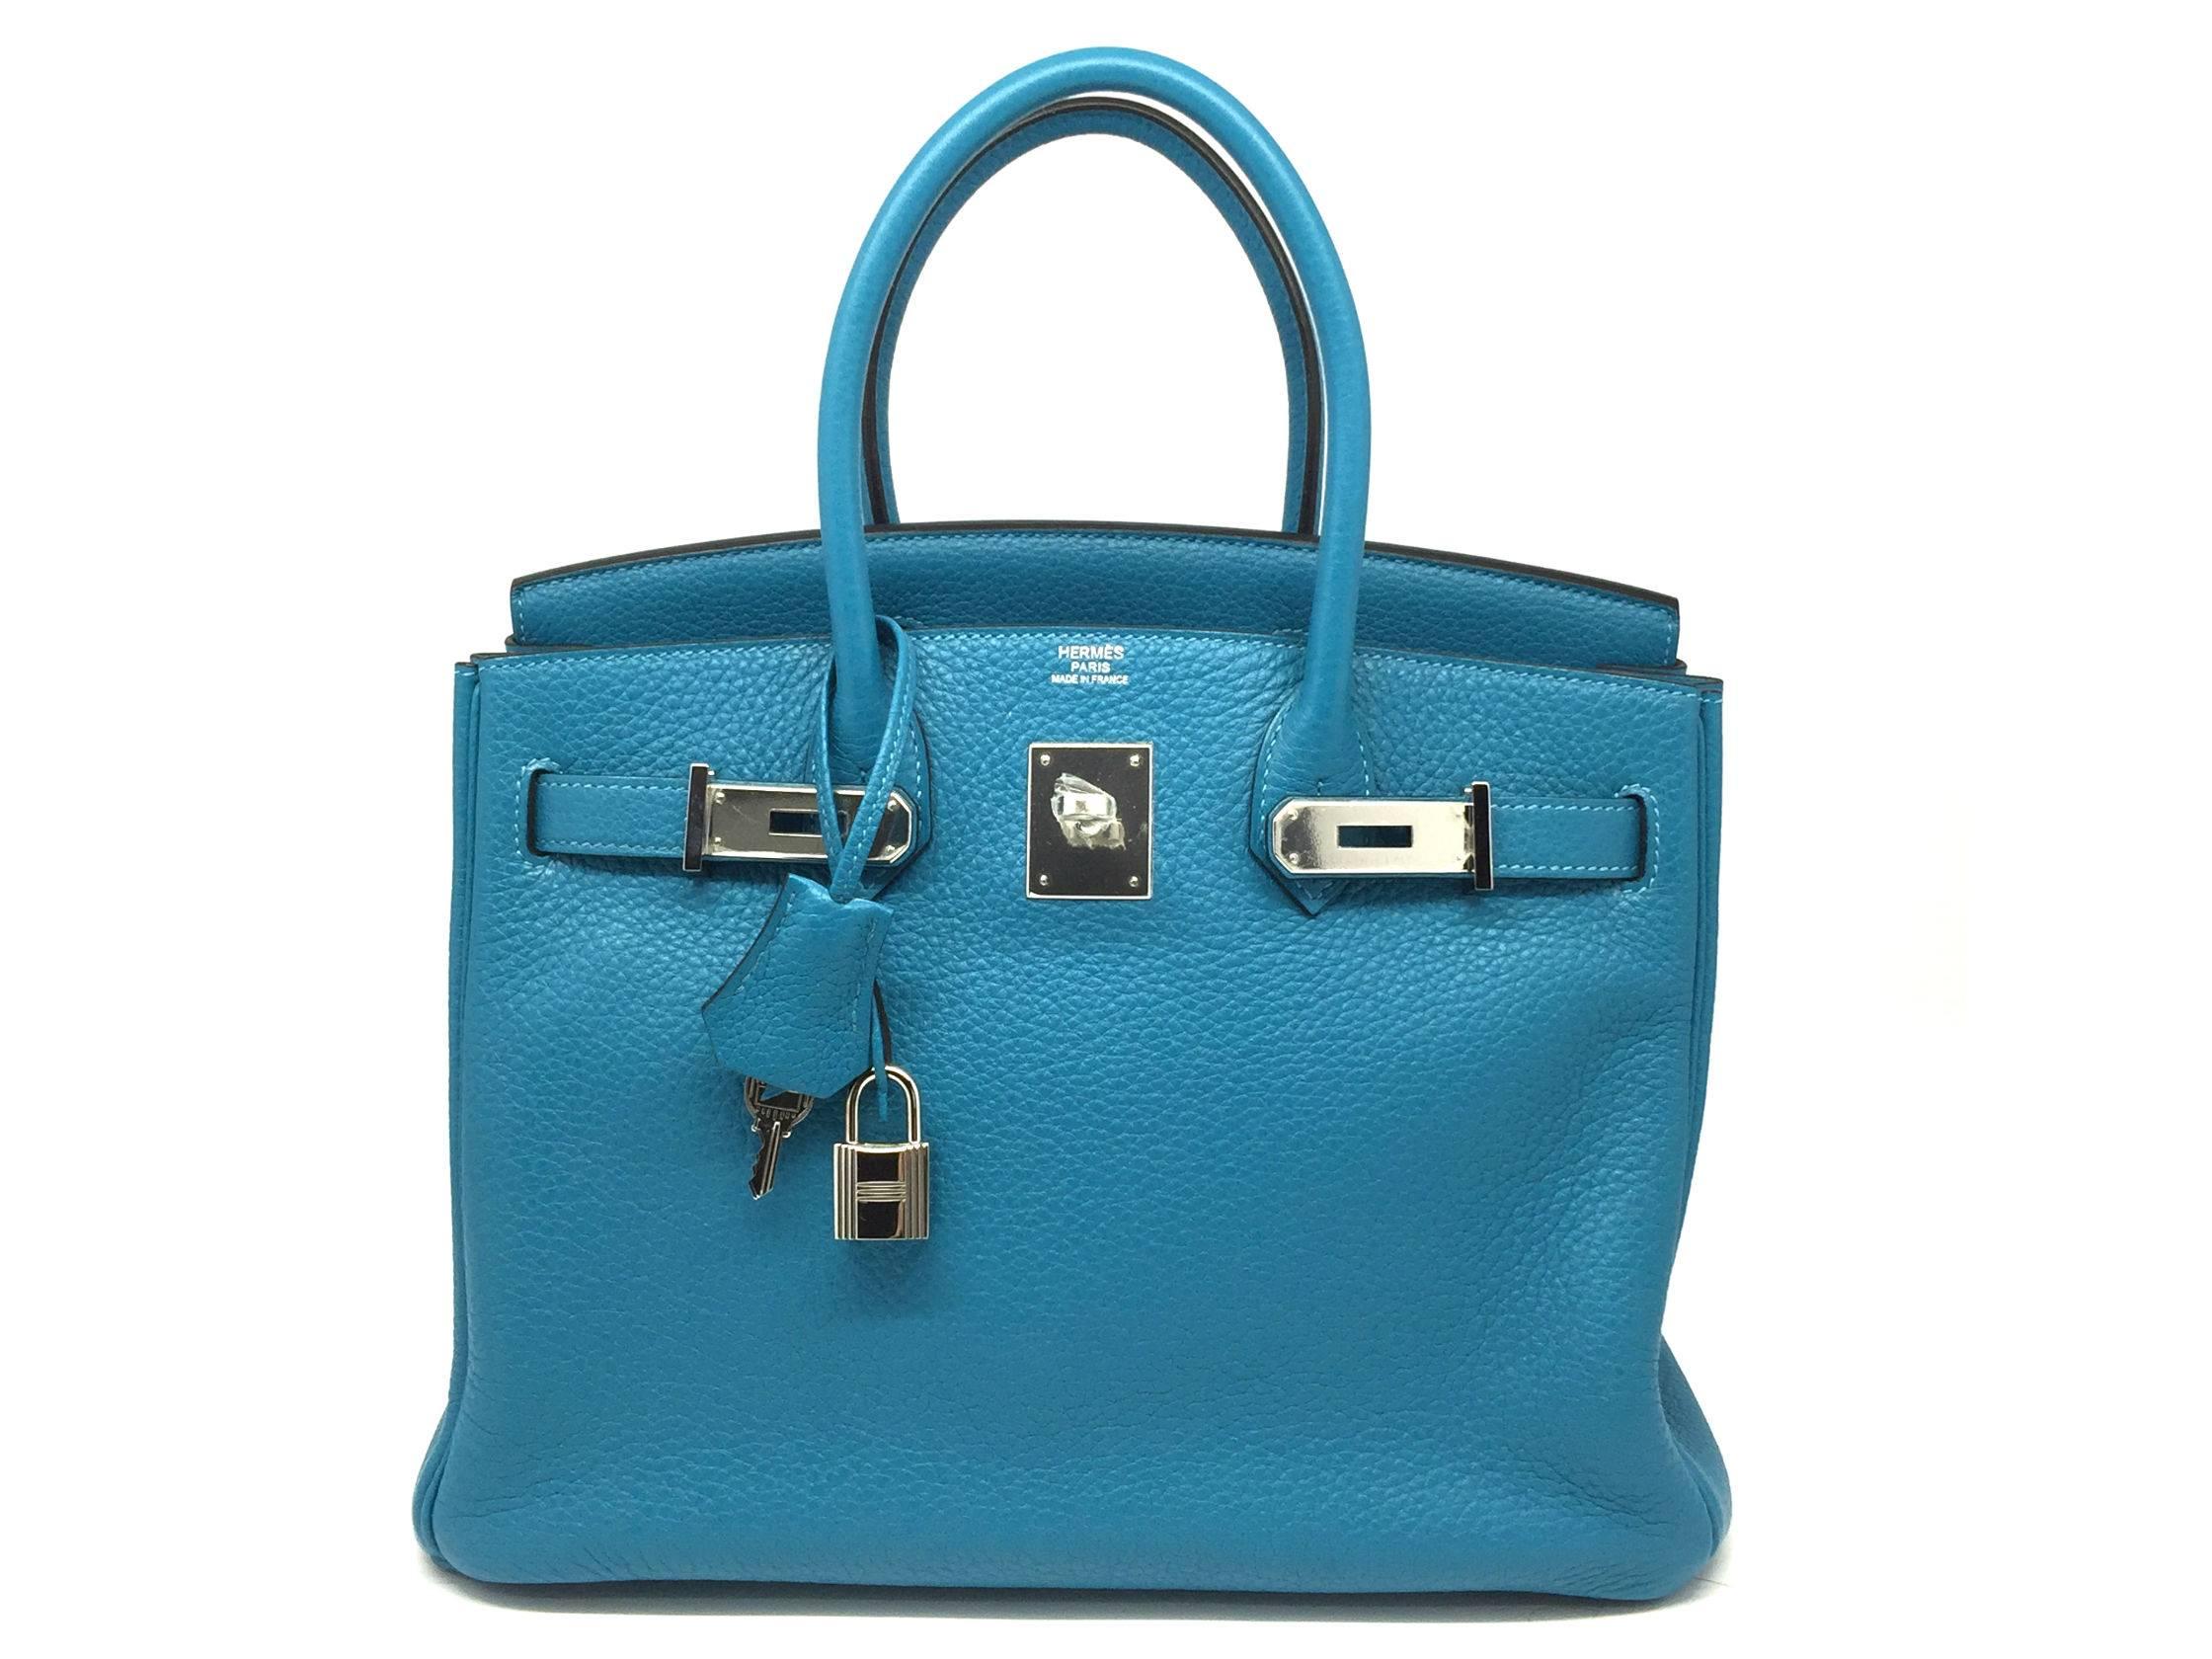 Color: Turquoise Blue
Material: Clemence Leather

Condition:
Rank N
Overall: Brand New Not Used
Surface: Good
Corners: Good
Edges: Good
Handles/Straps: Good
Hardware: Good


Dimension:
W30 x H22 x D16 cm

Stamp: R in square (2014)
come with lock and